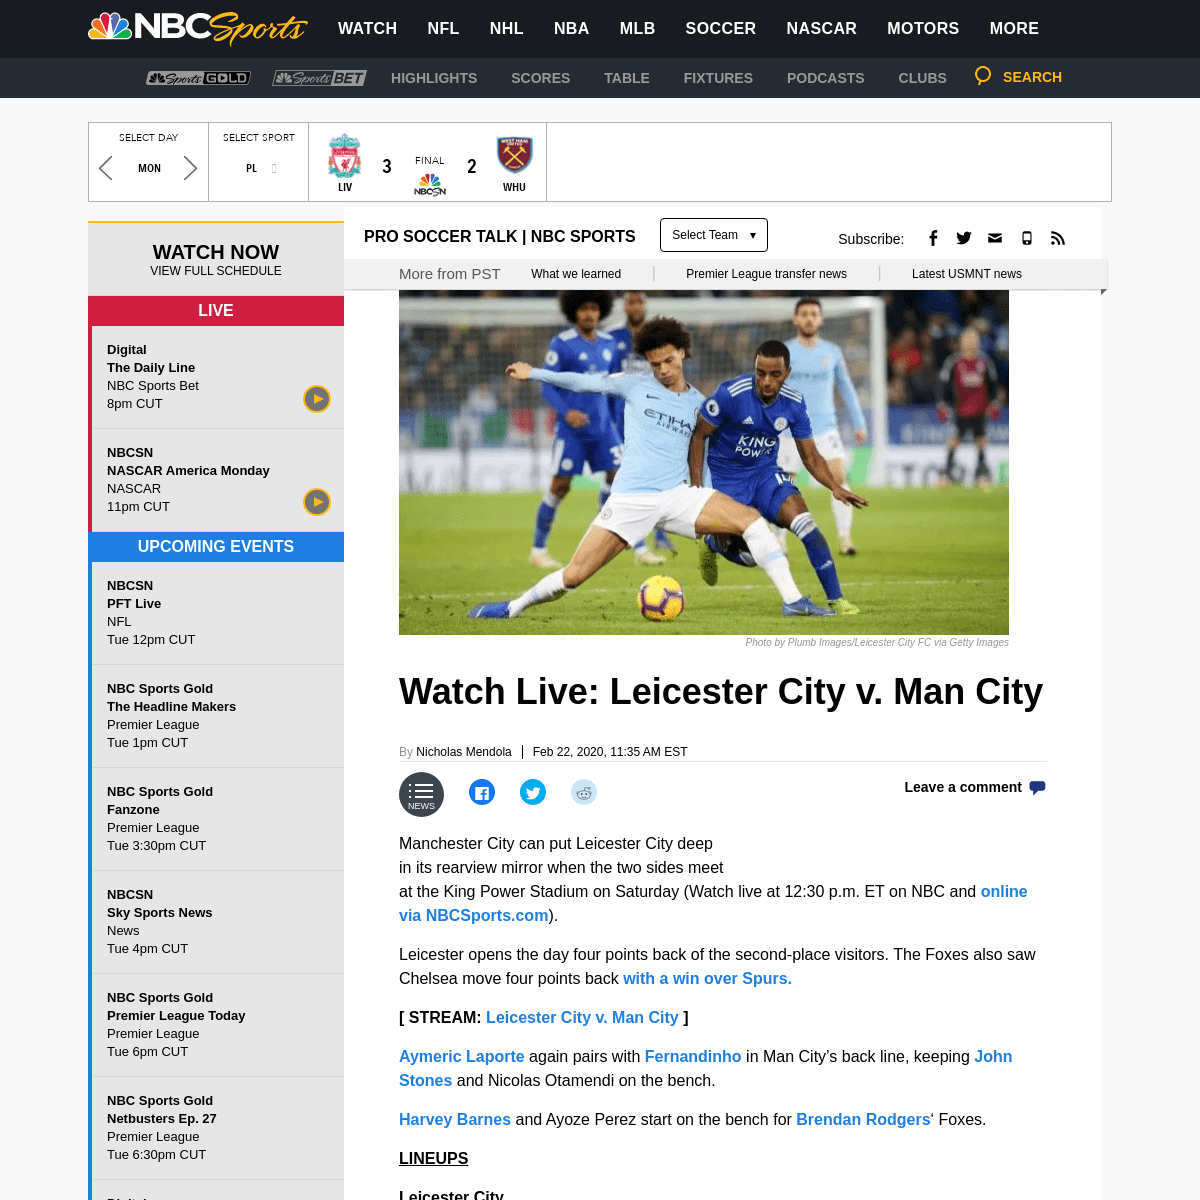 A complete backup of soccer.nbcsports.com/2020/02/22/leicester-city-manchester-city-watch-live-stream-link-premier-league/